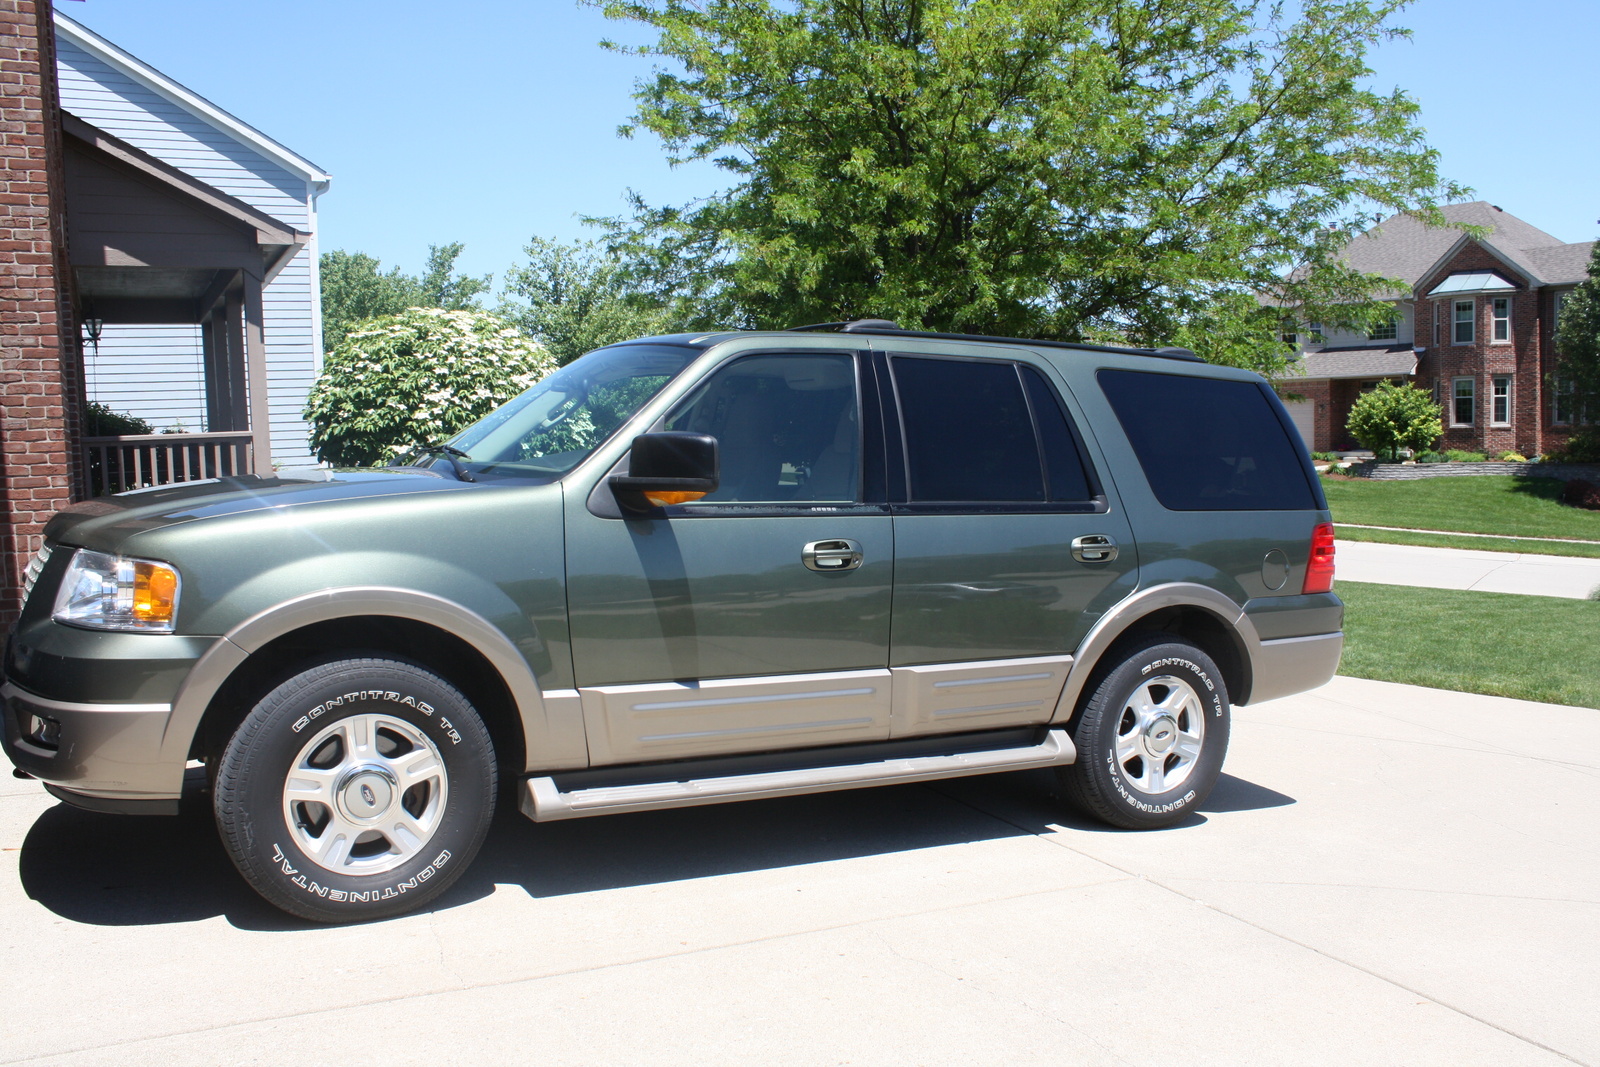 2003 Ford expedition eddie bauer 4wd review #3